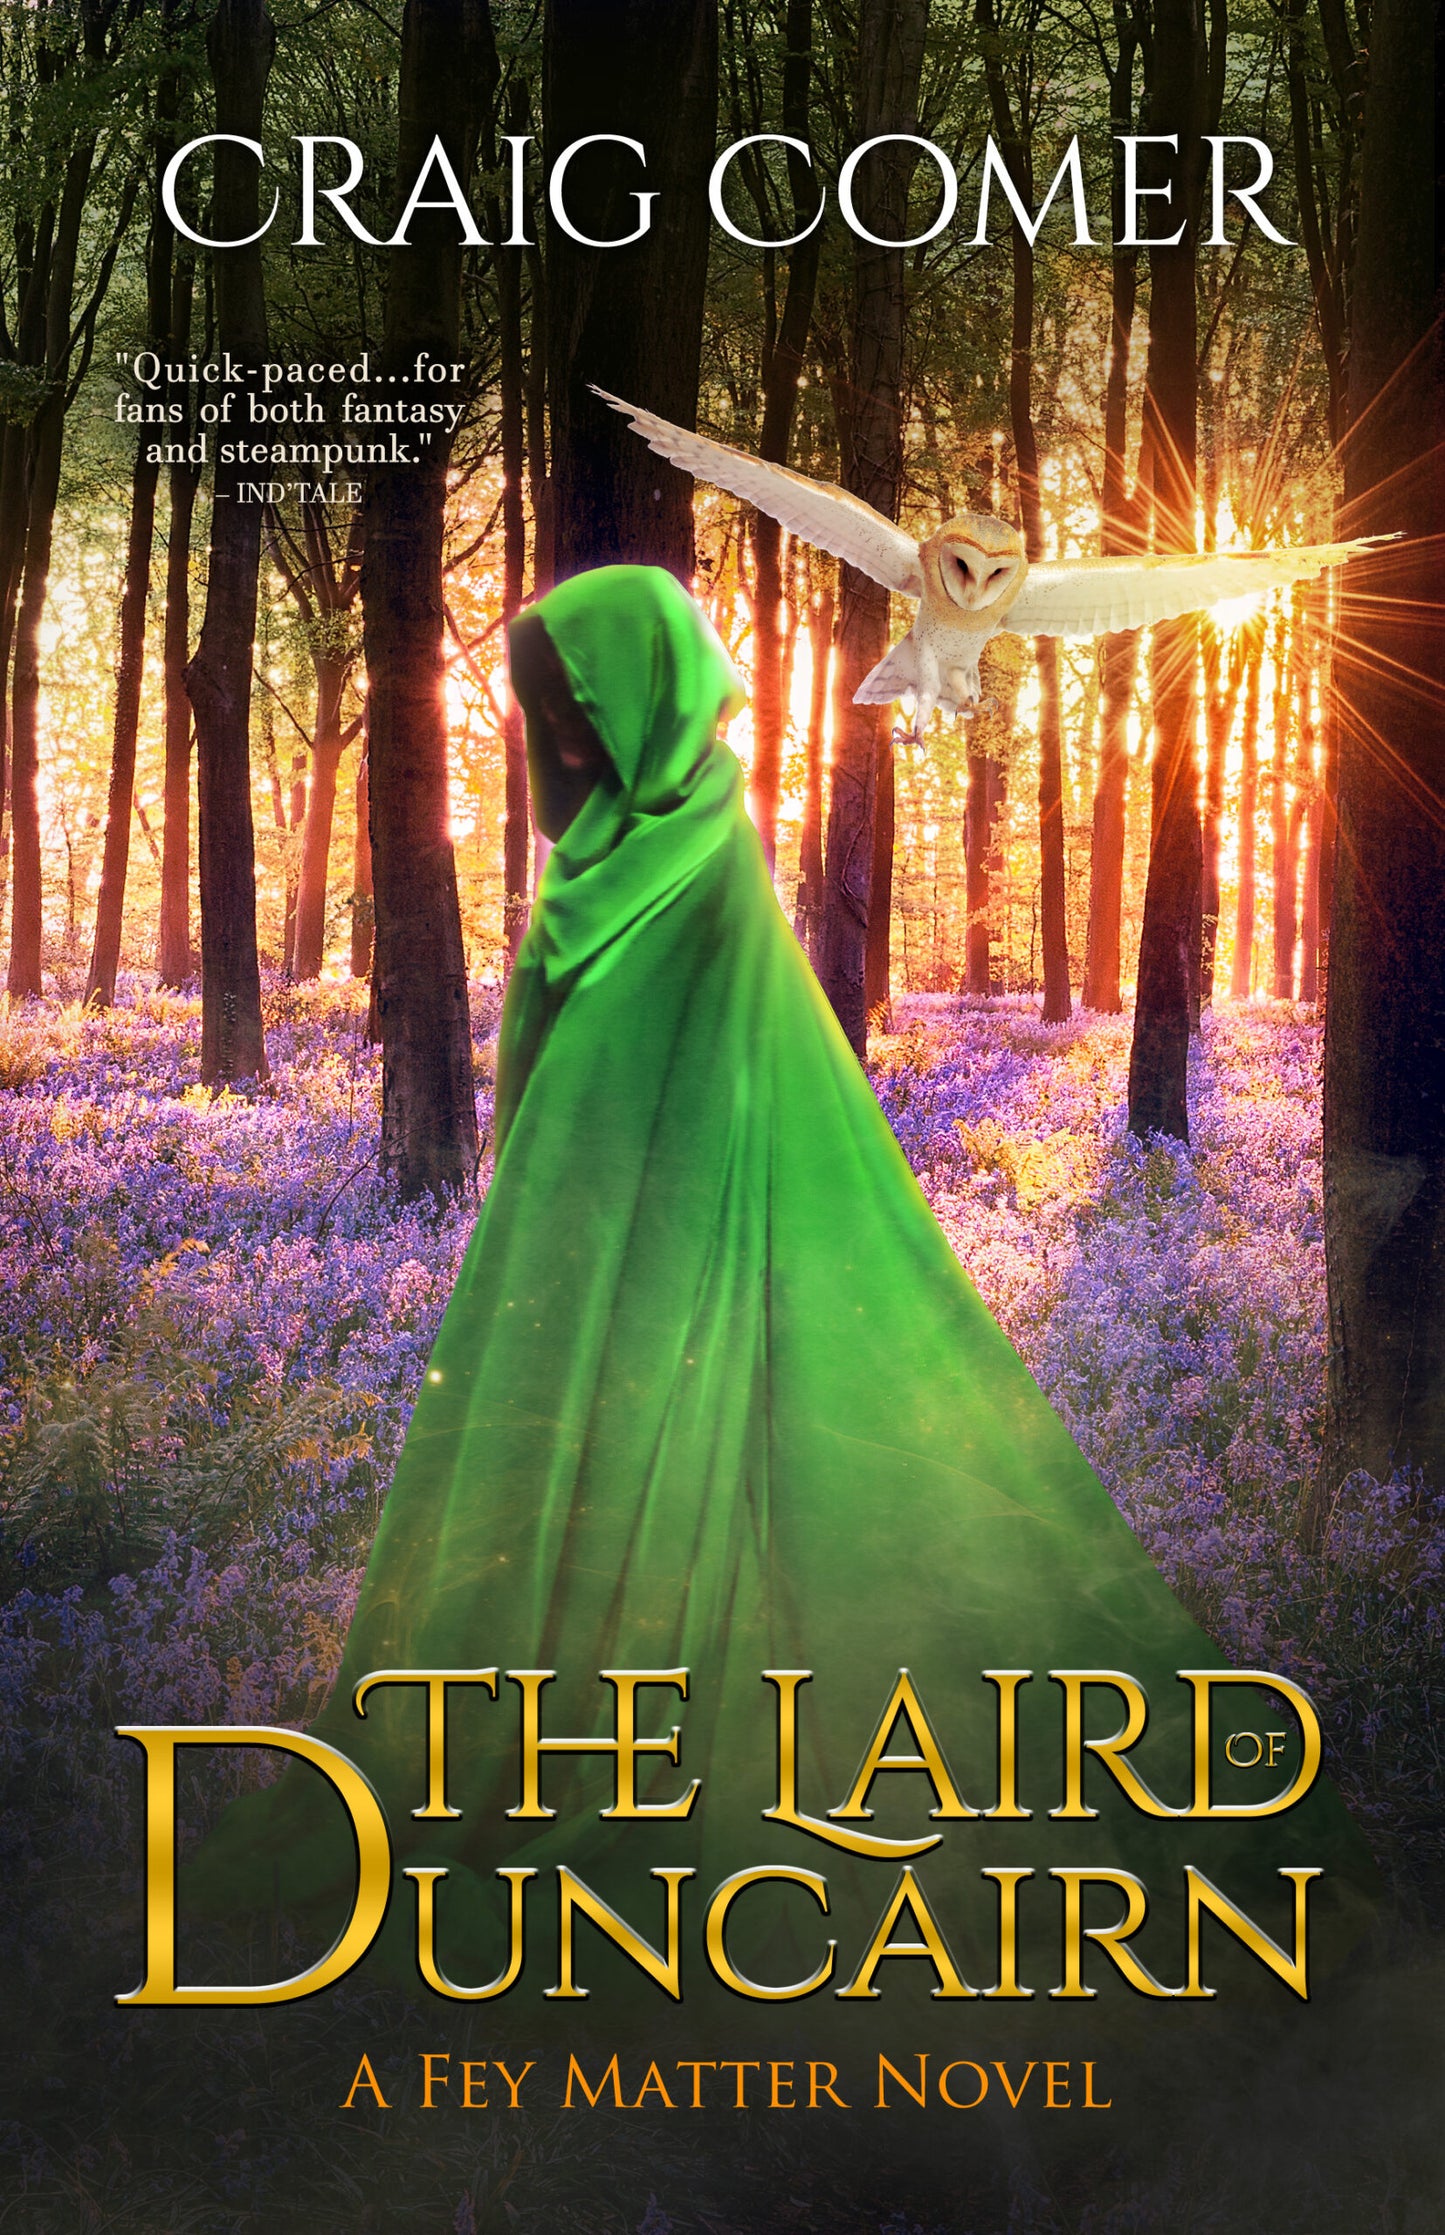 THE LAIRD OF DUNCAIRN (eBook)